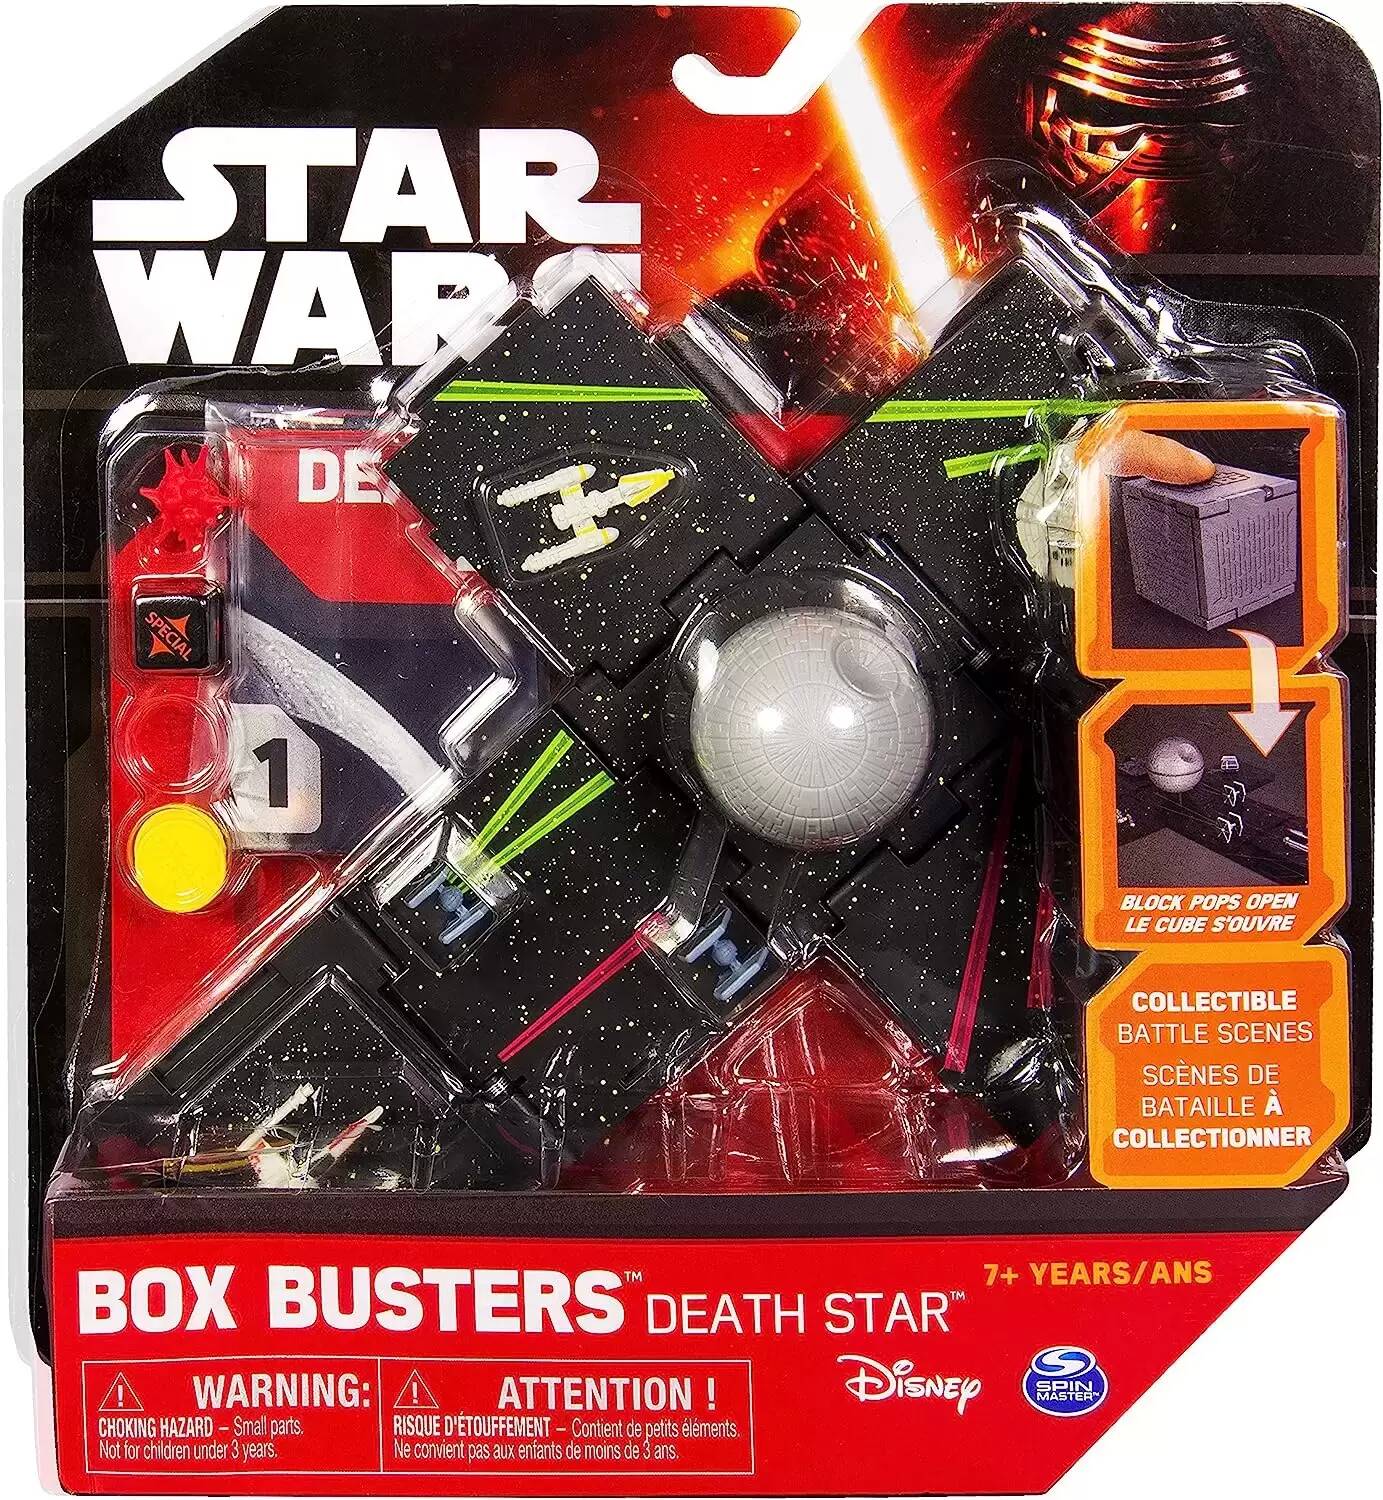 Limited Edition Star Wars Figures - Box Busters Death Star